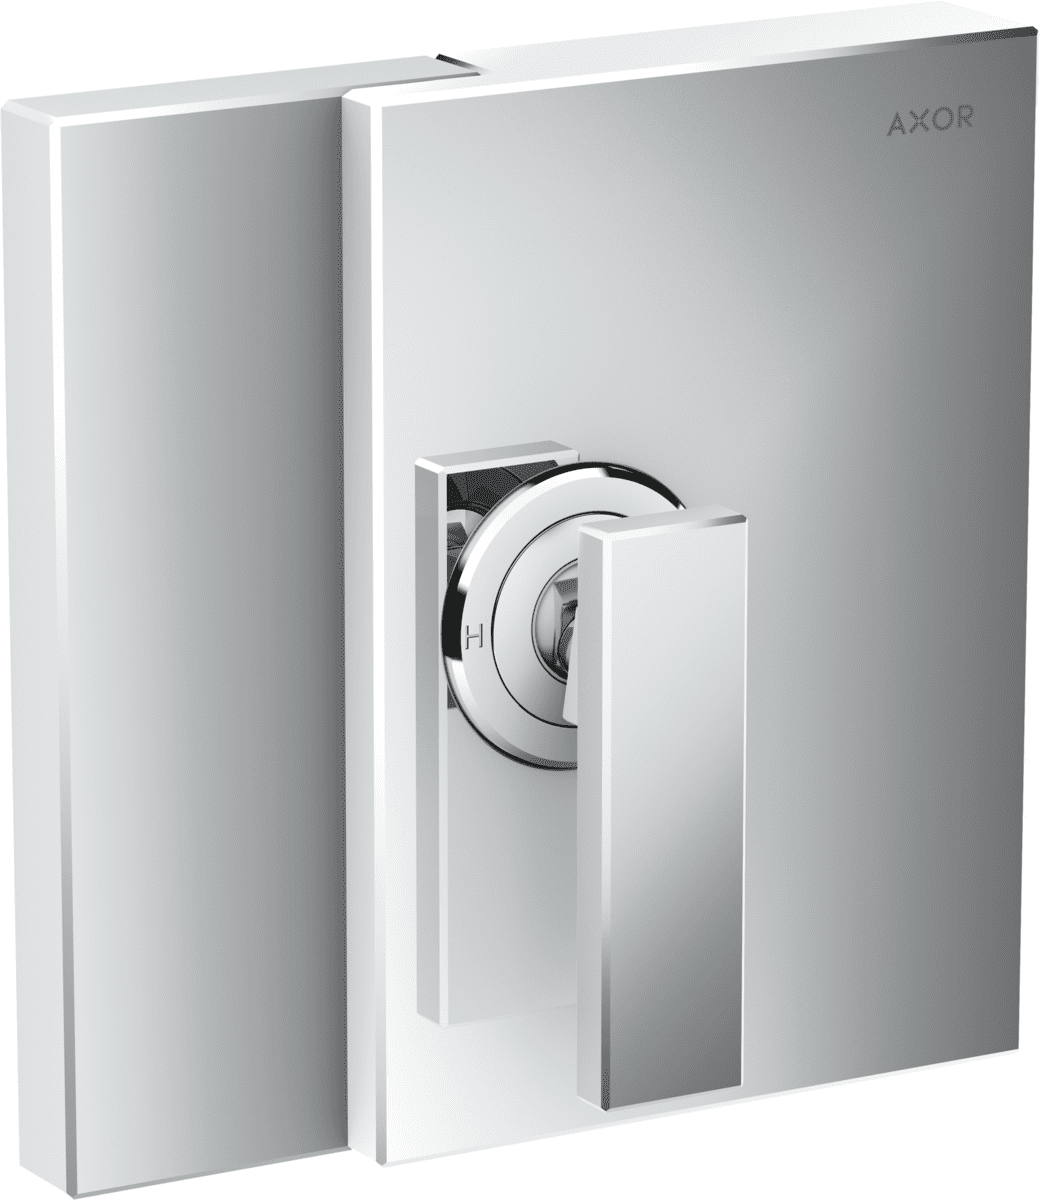 Picture of HANSGROHE AXOR Edge Single lever shower mixer for concealed installation #46650000 - Chrome